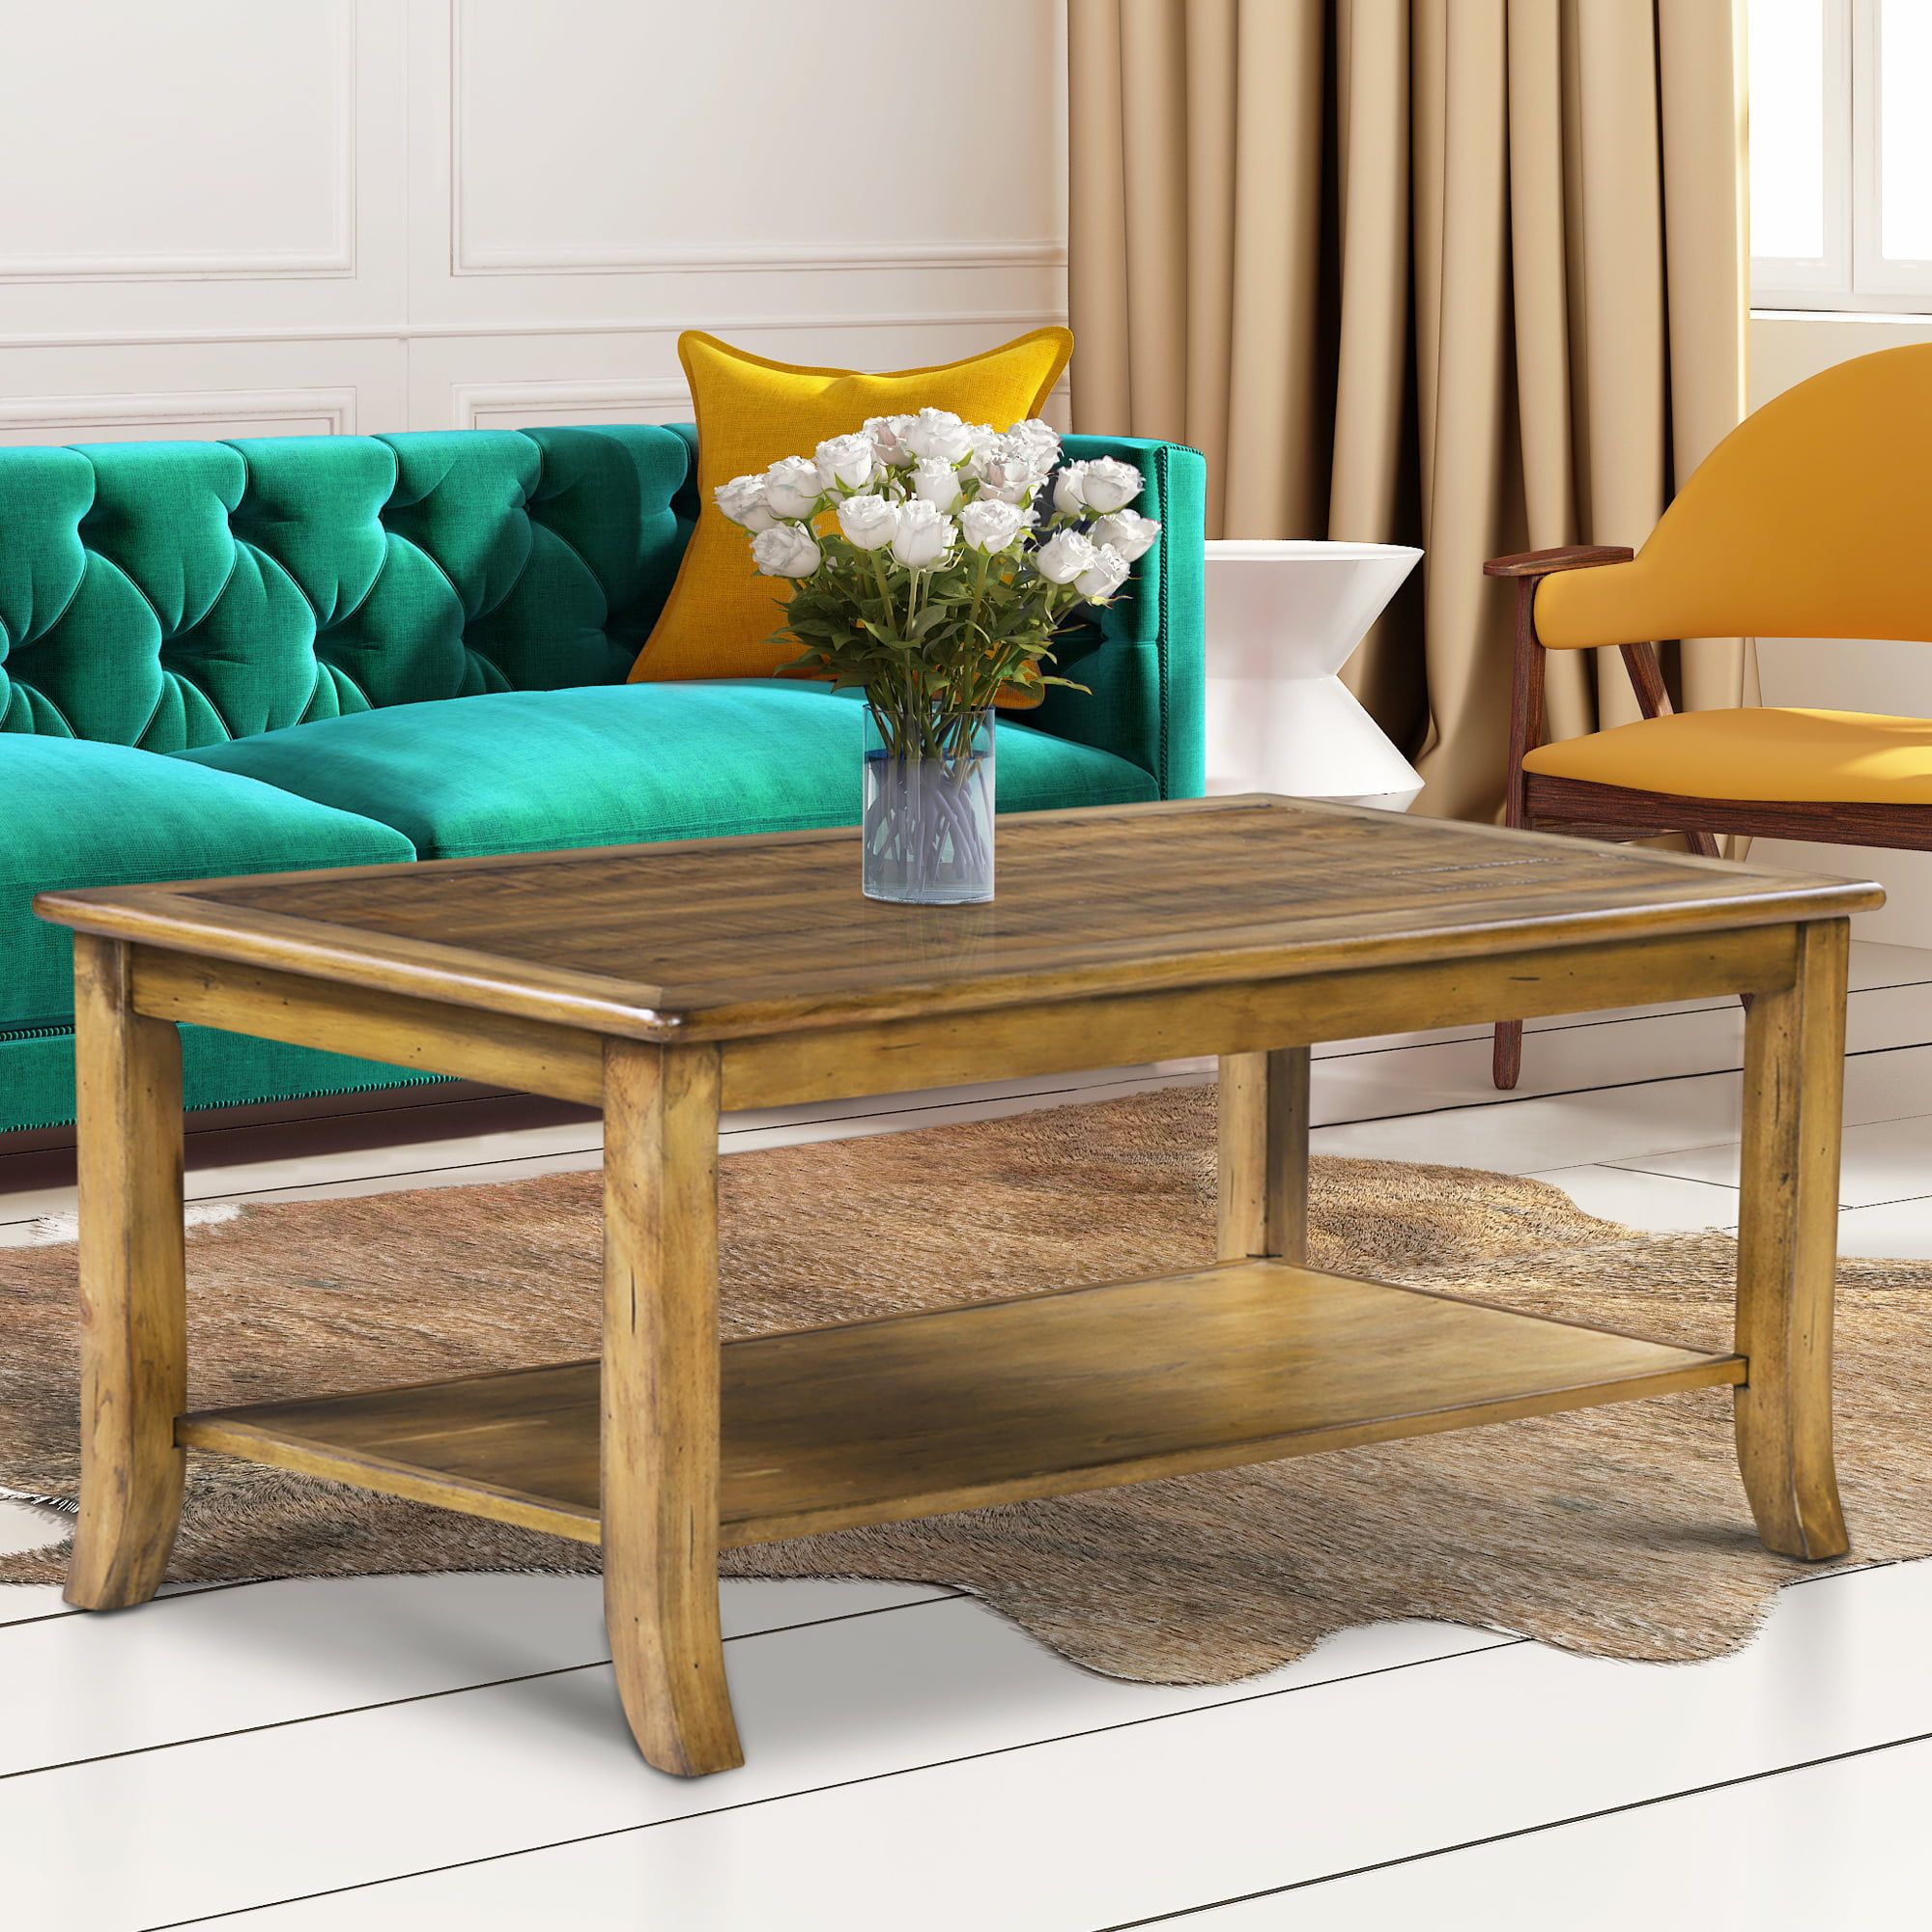 Grandrest Cocktail Coffee Table, Rustic Maple Brown – Walmart Throughout Brown Rustic Coffee Tables (View 4 of 20)